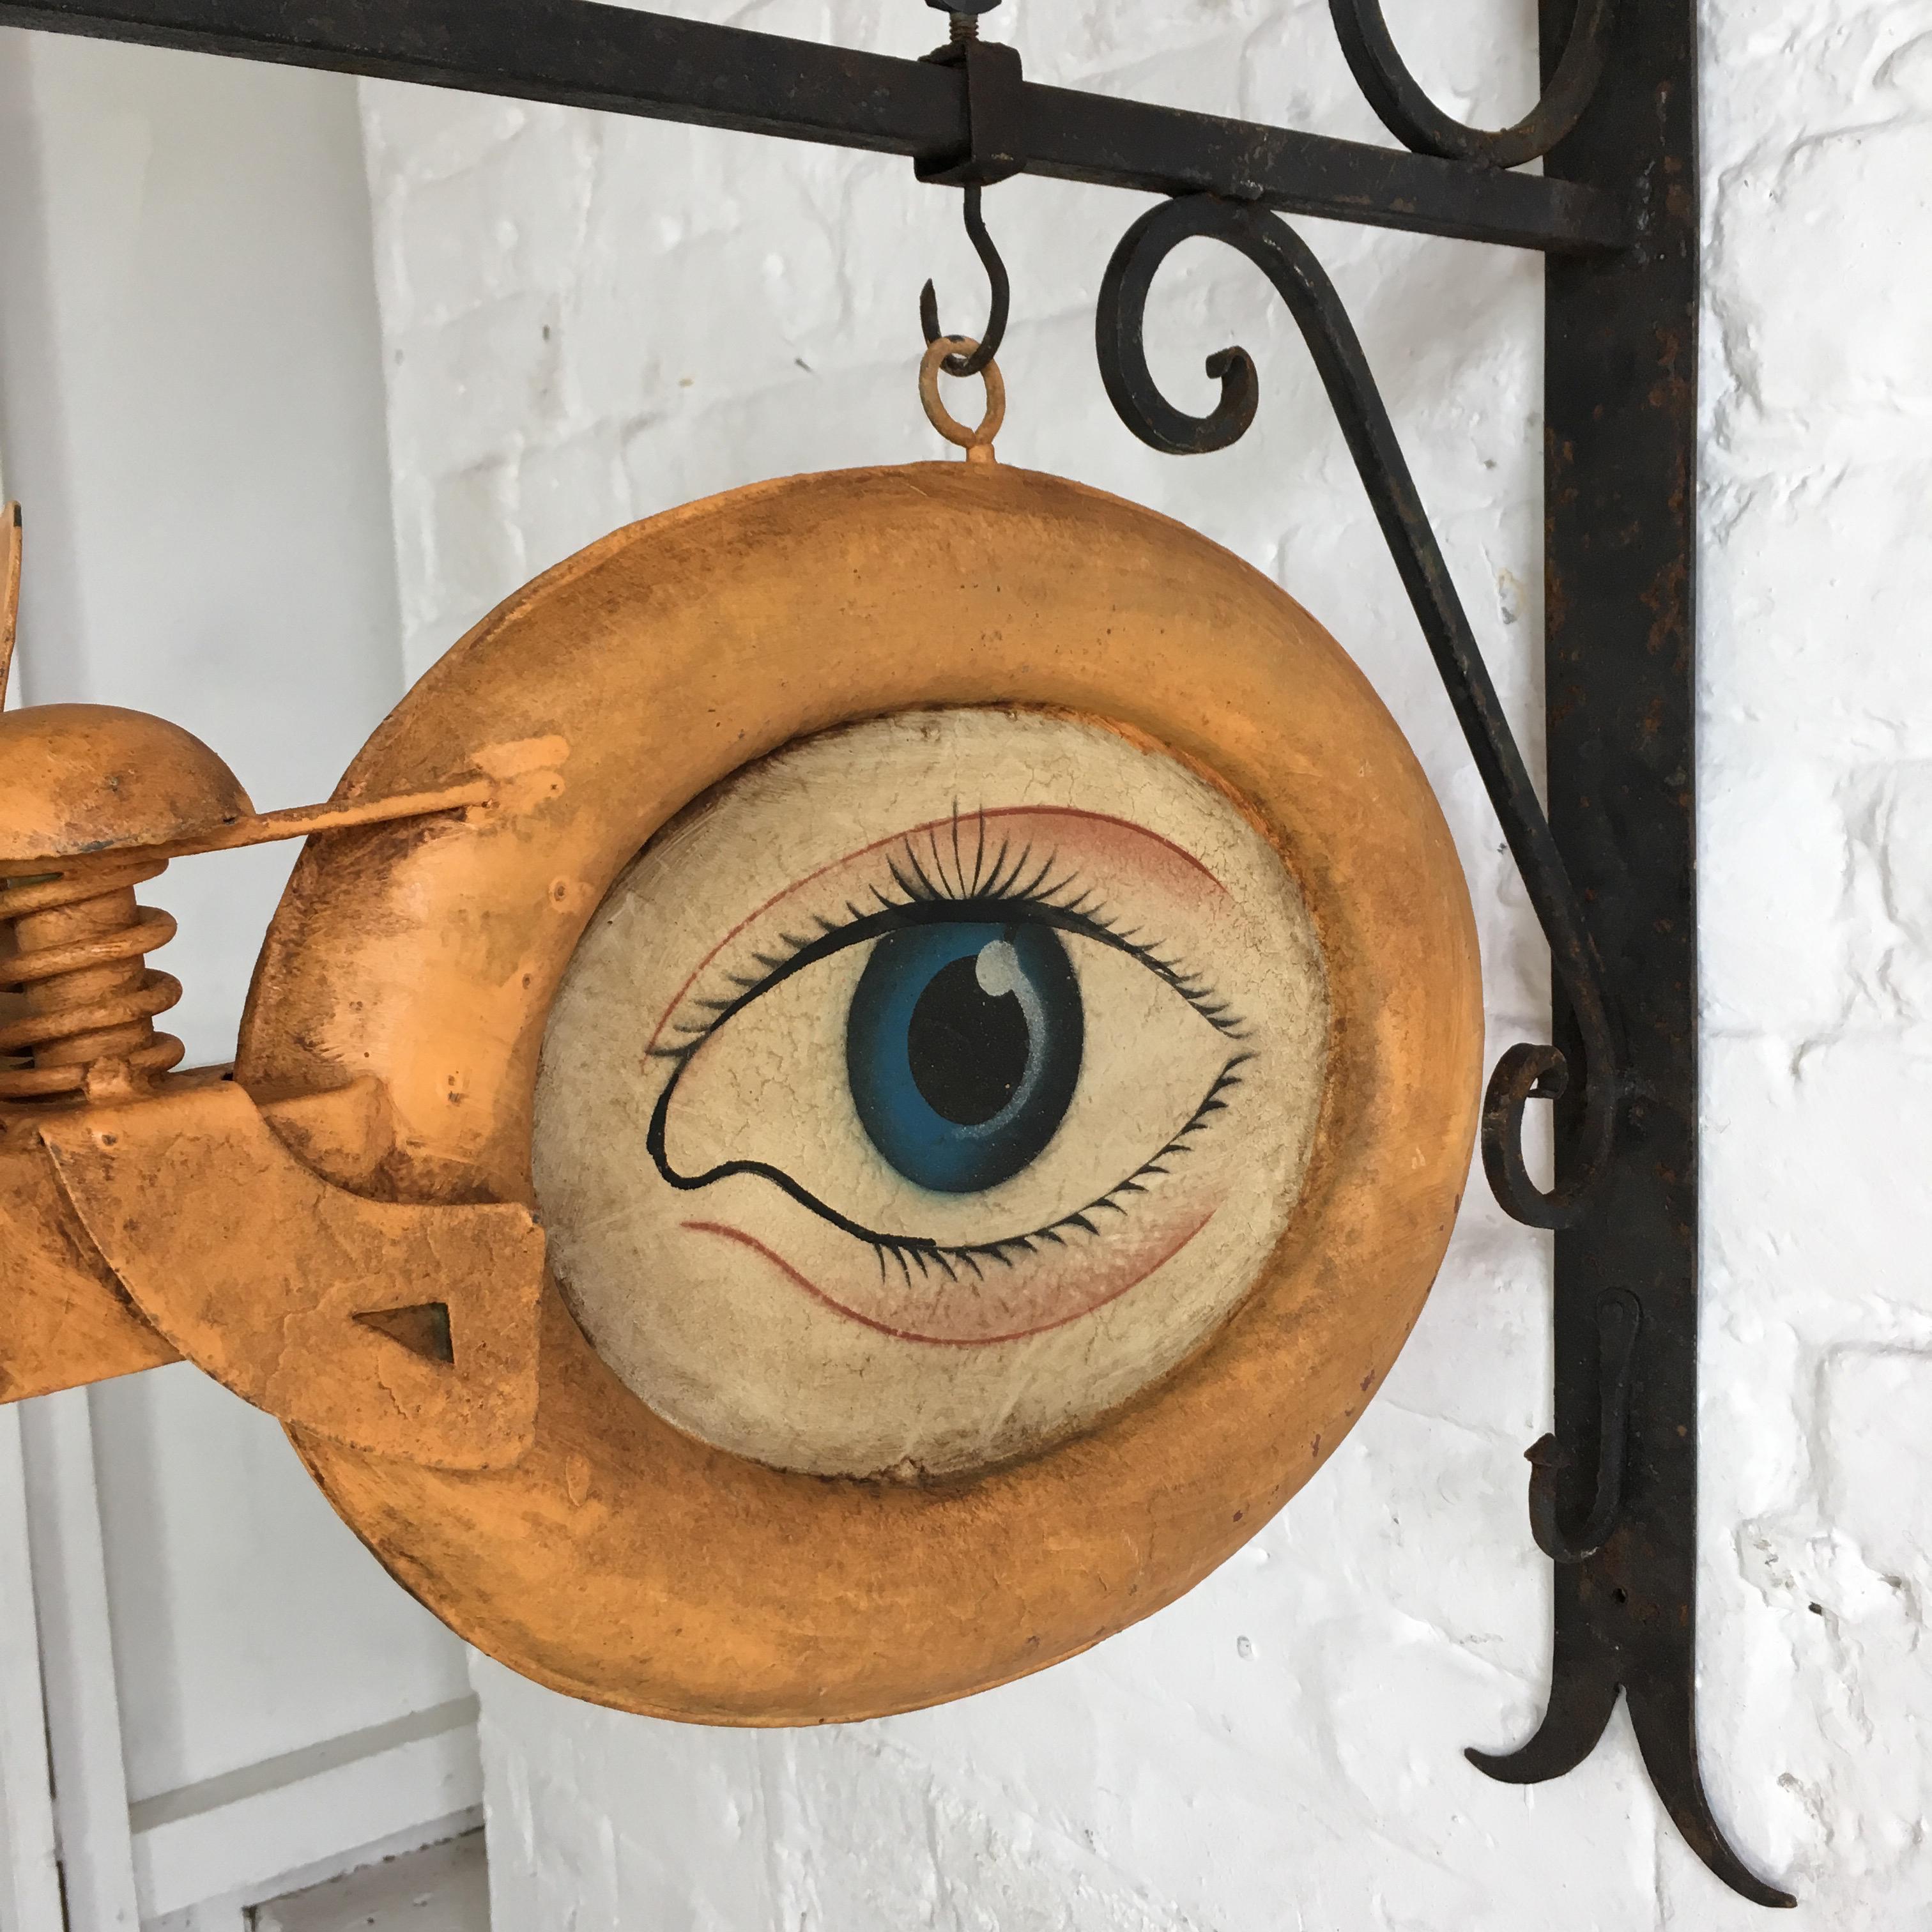 Hand-Crafted Optometrist Trade Sign with Wall Bracket, circa 1920s